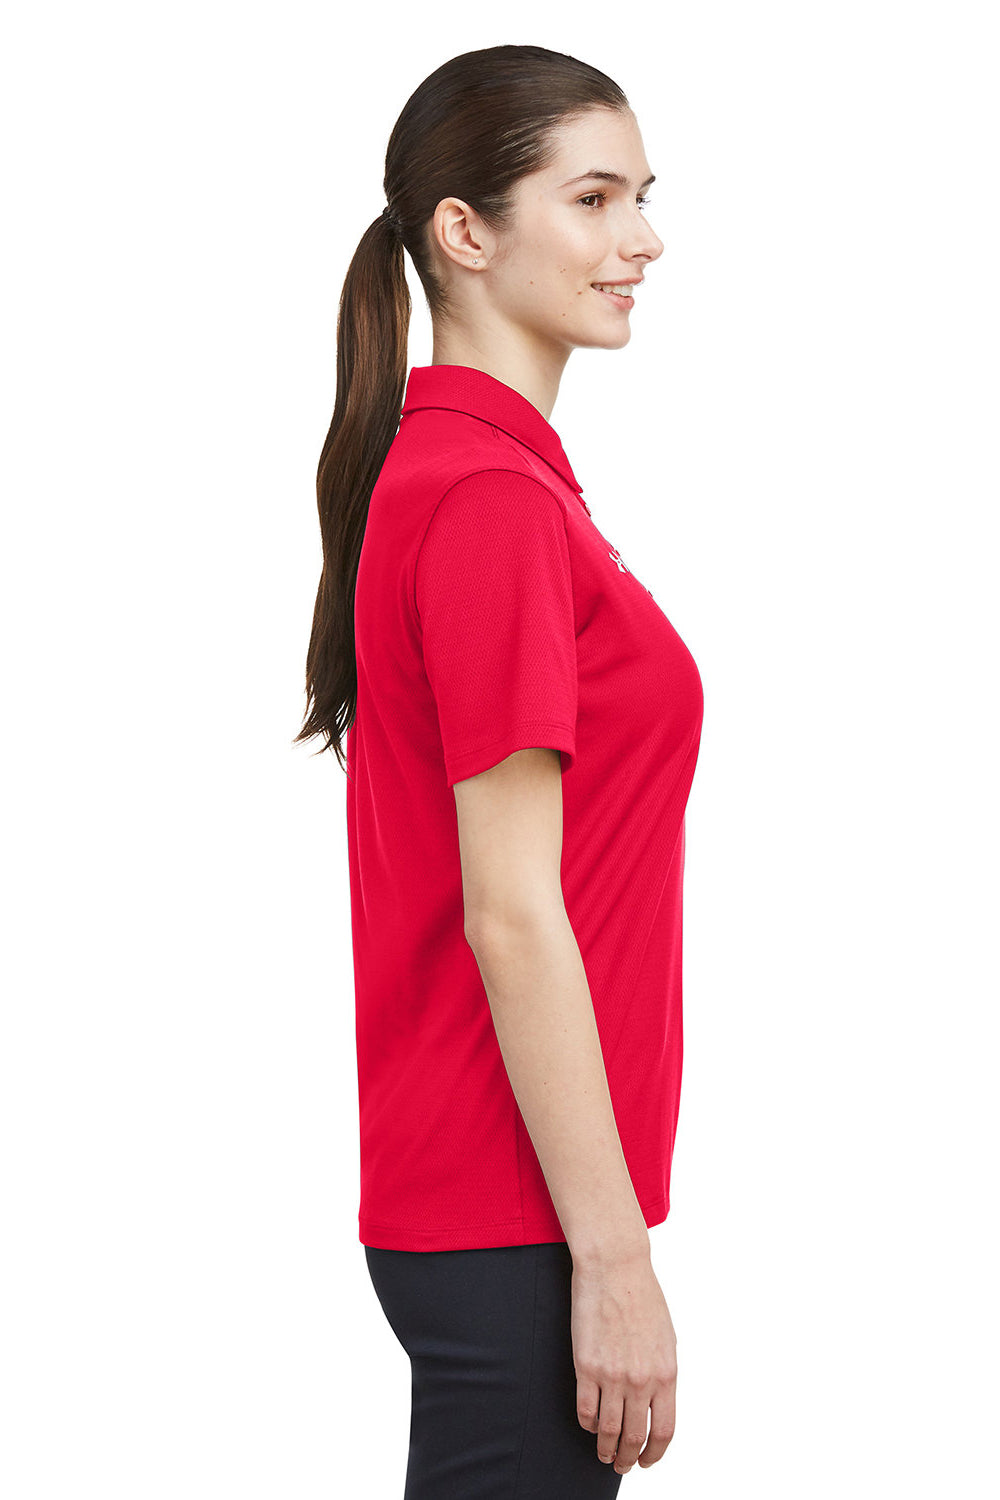 Under Armour 1370431 Womens Tech Moisture Wicking Short Sleeve Polo Shirt Red Model Side